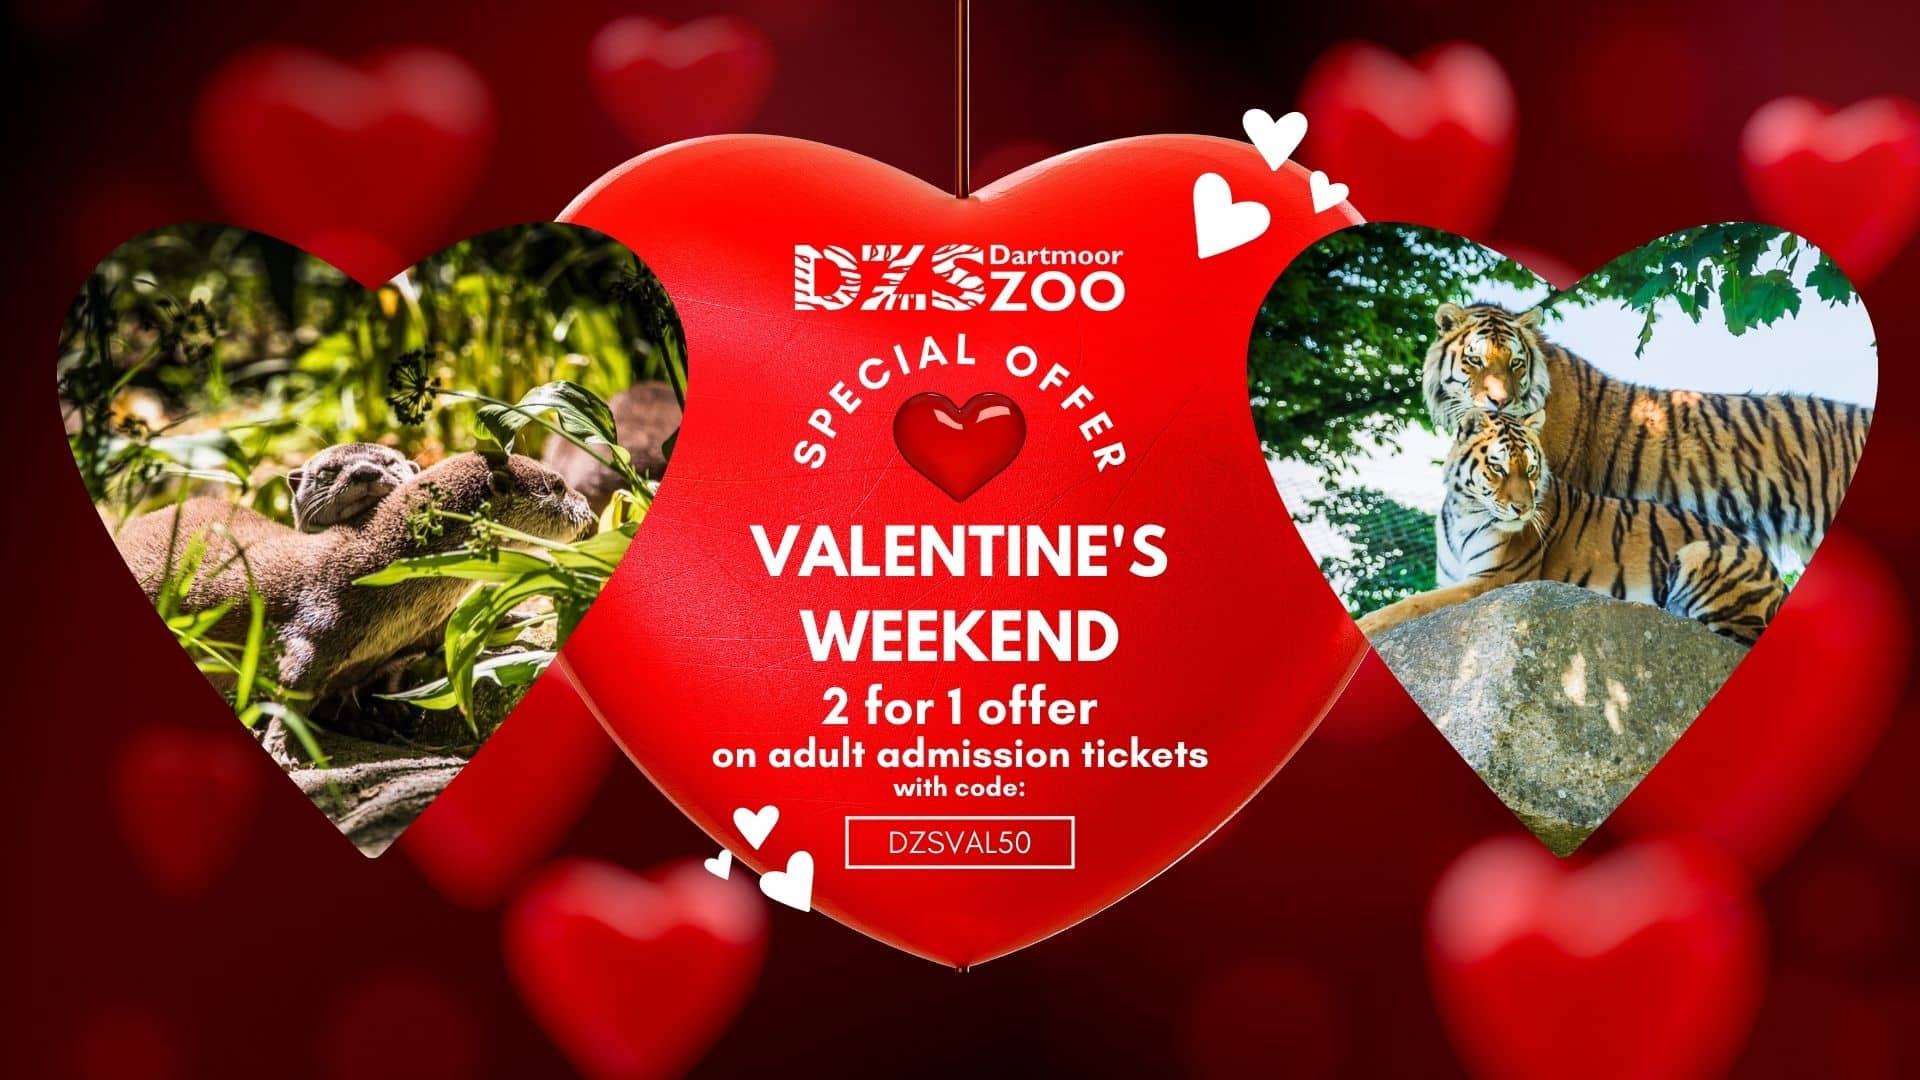 Go wild for our Valentine’s 2 for 1 offer!